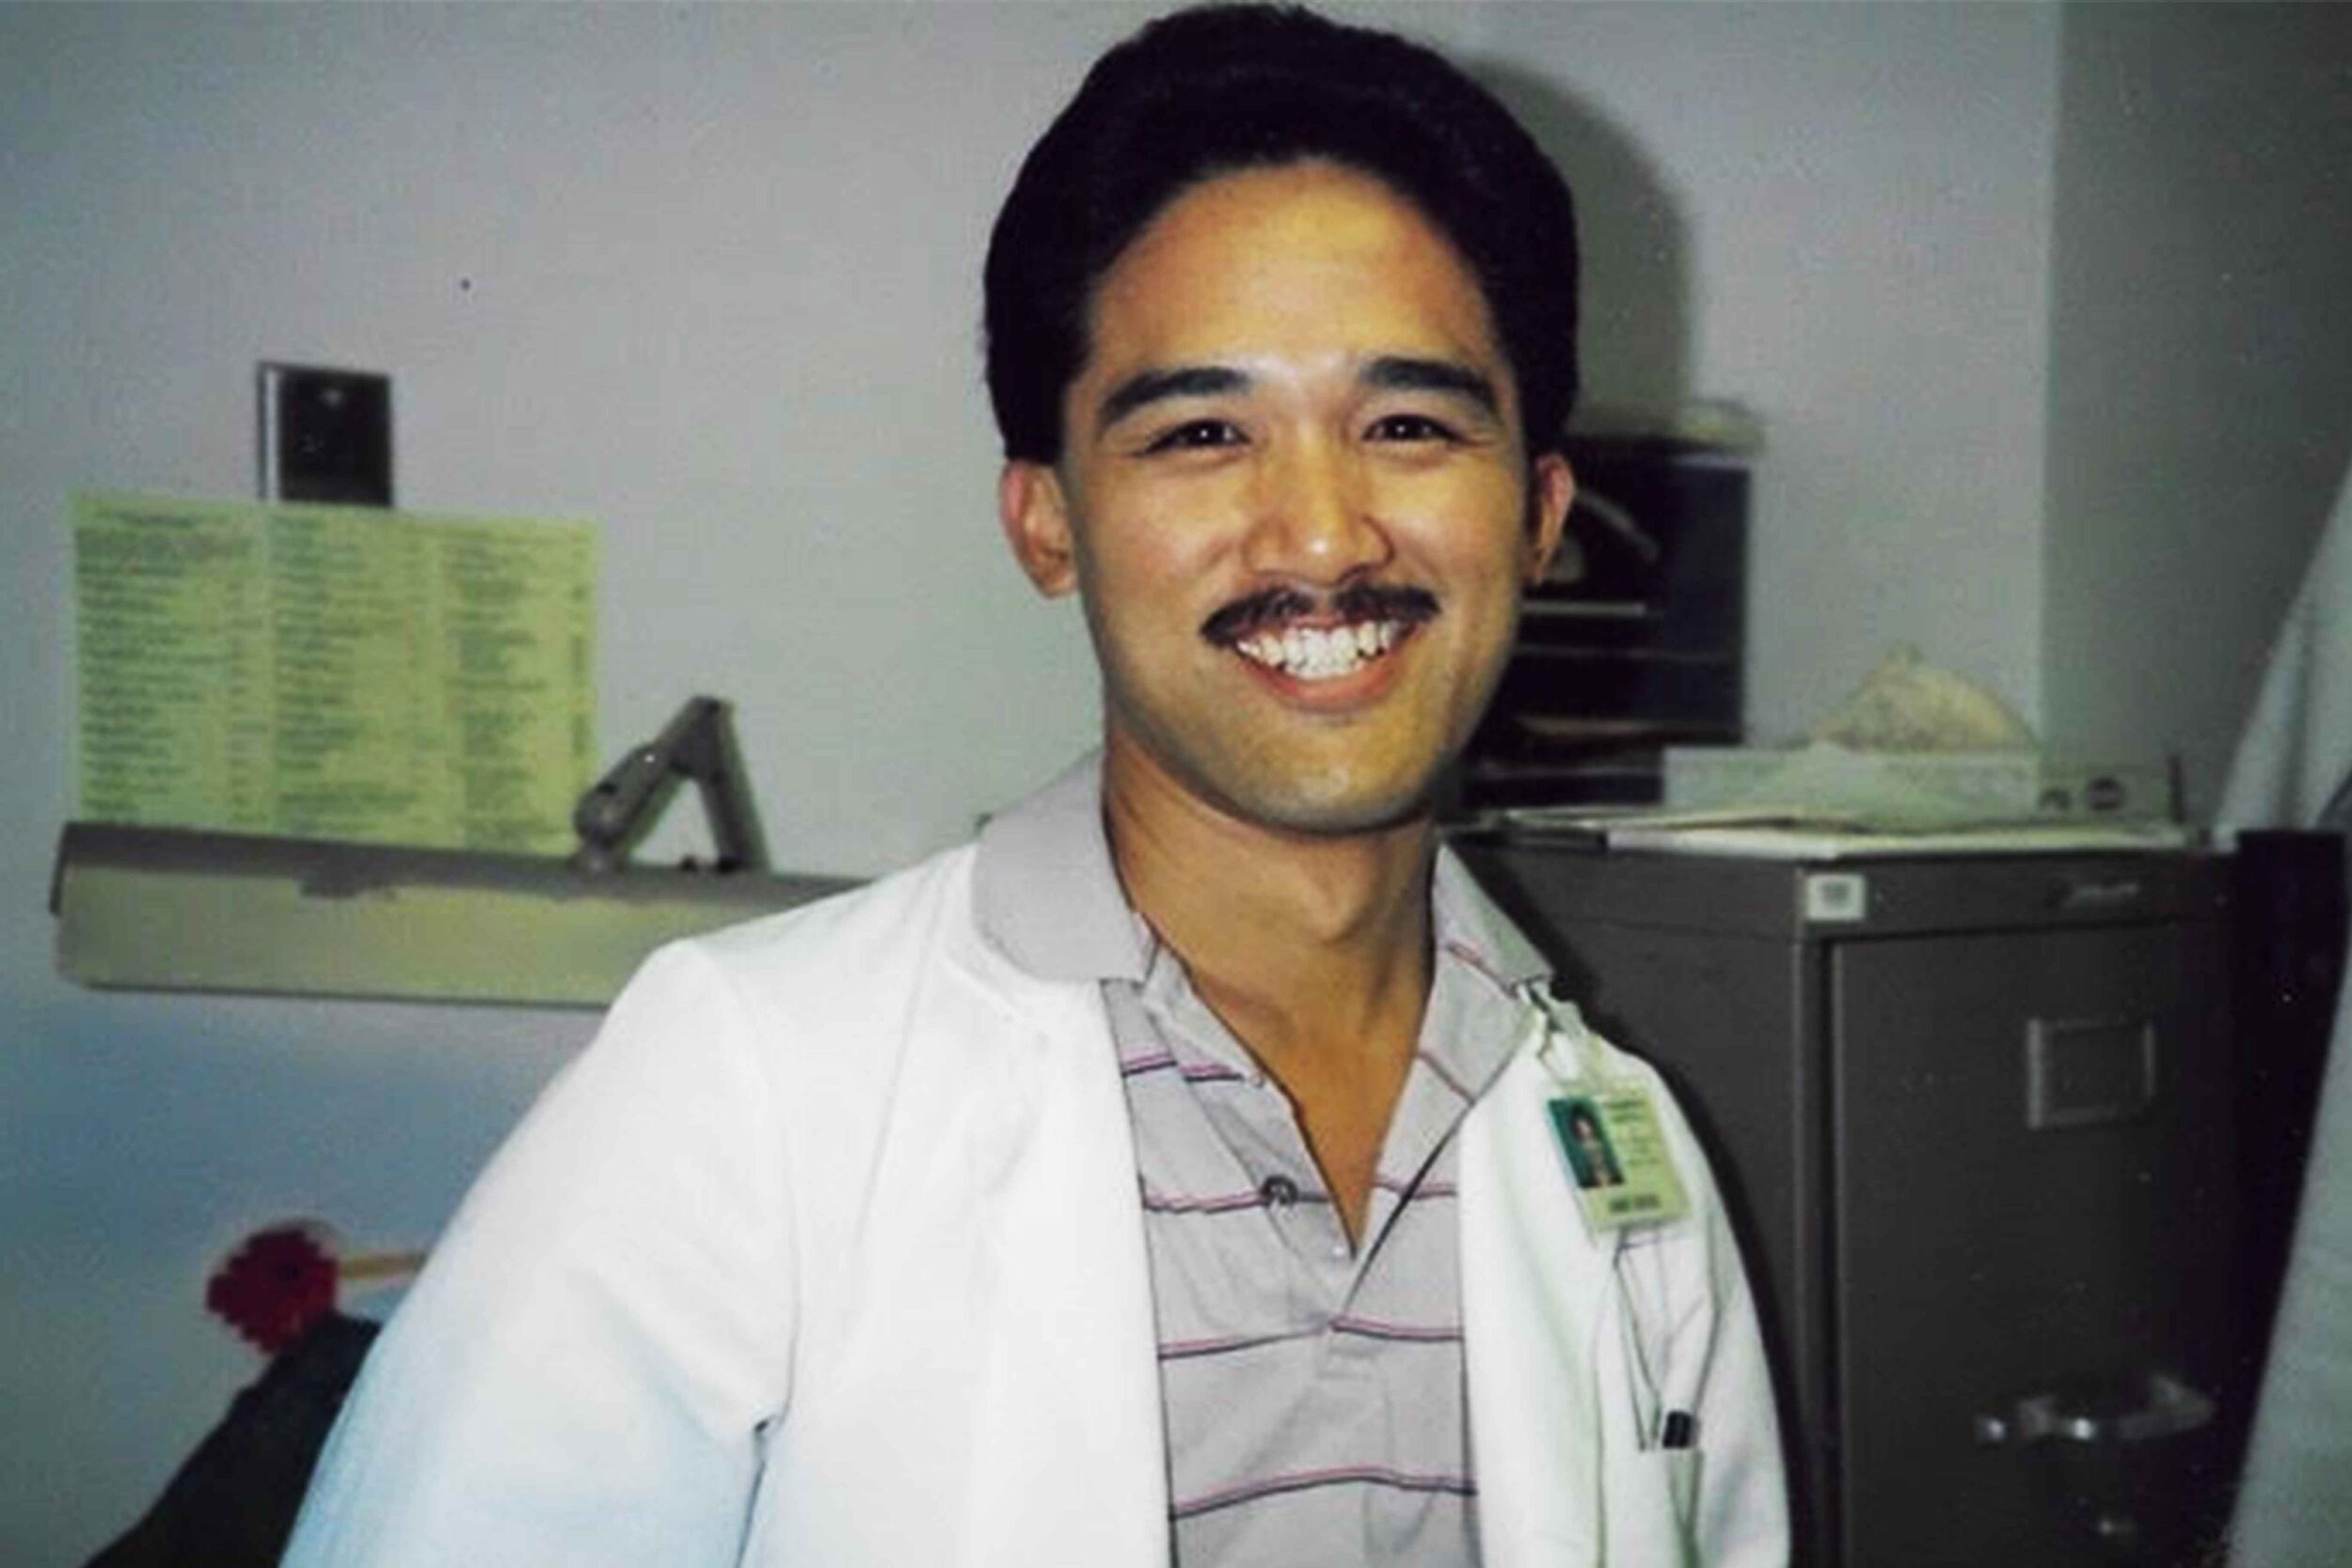  Jaime Geaga worked as a physician assistant in San Francisco in the 1980s. Courtesy of Jaime Geaga. 